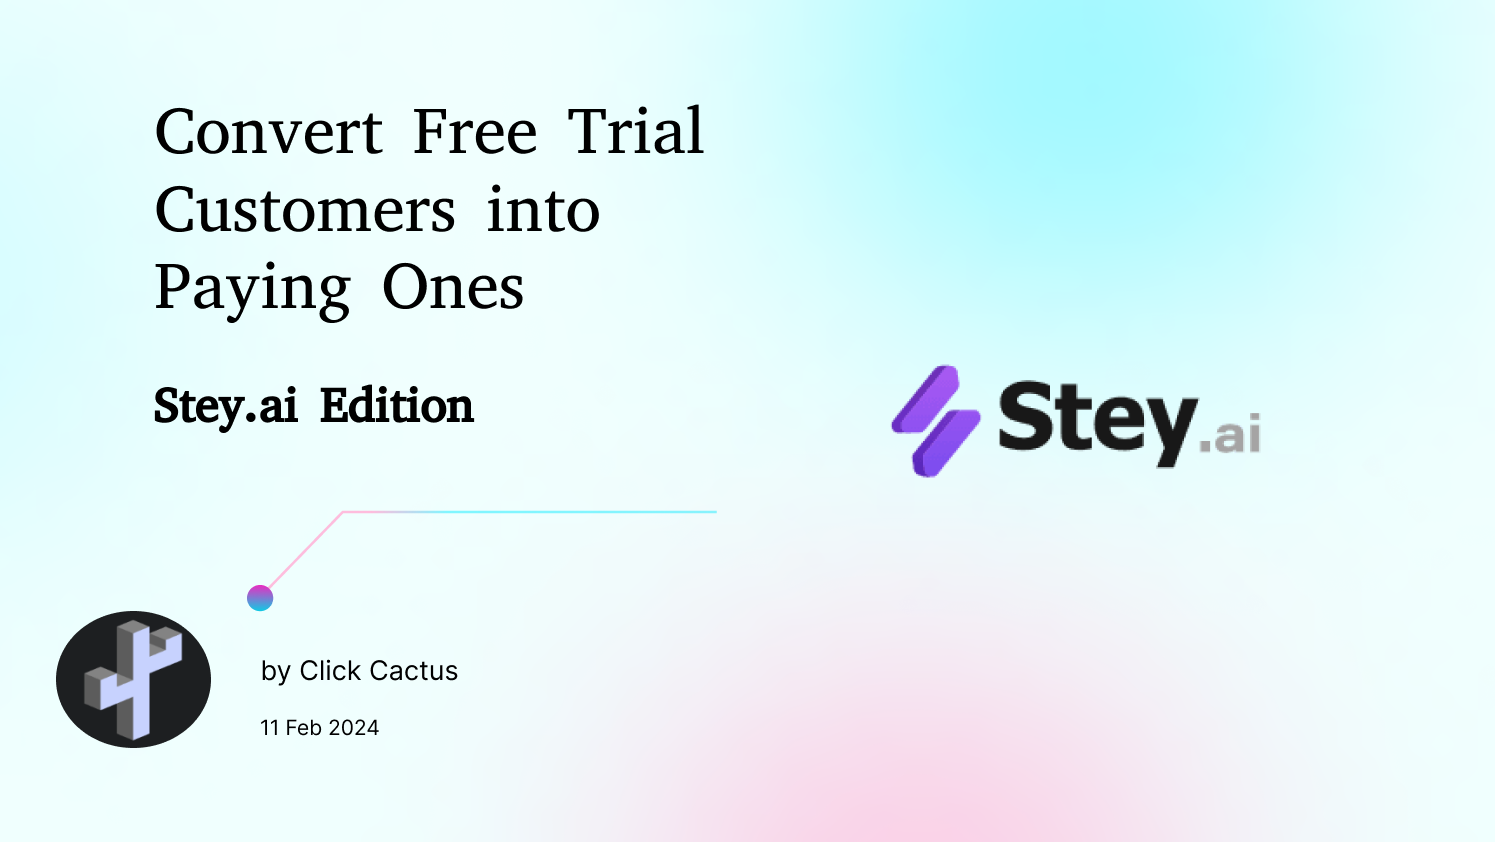 Convert your Free trail customers - Stey.ai edition